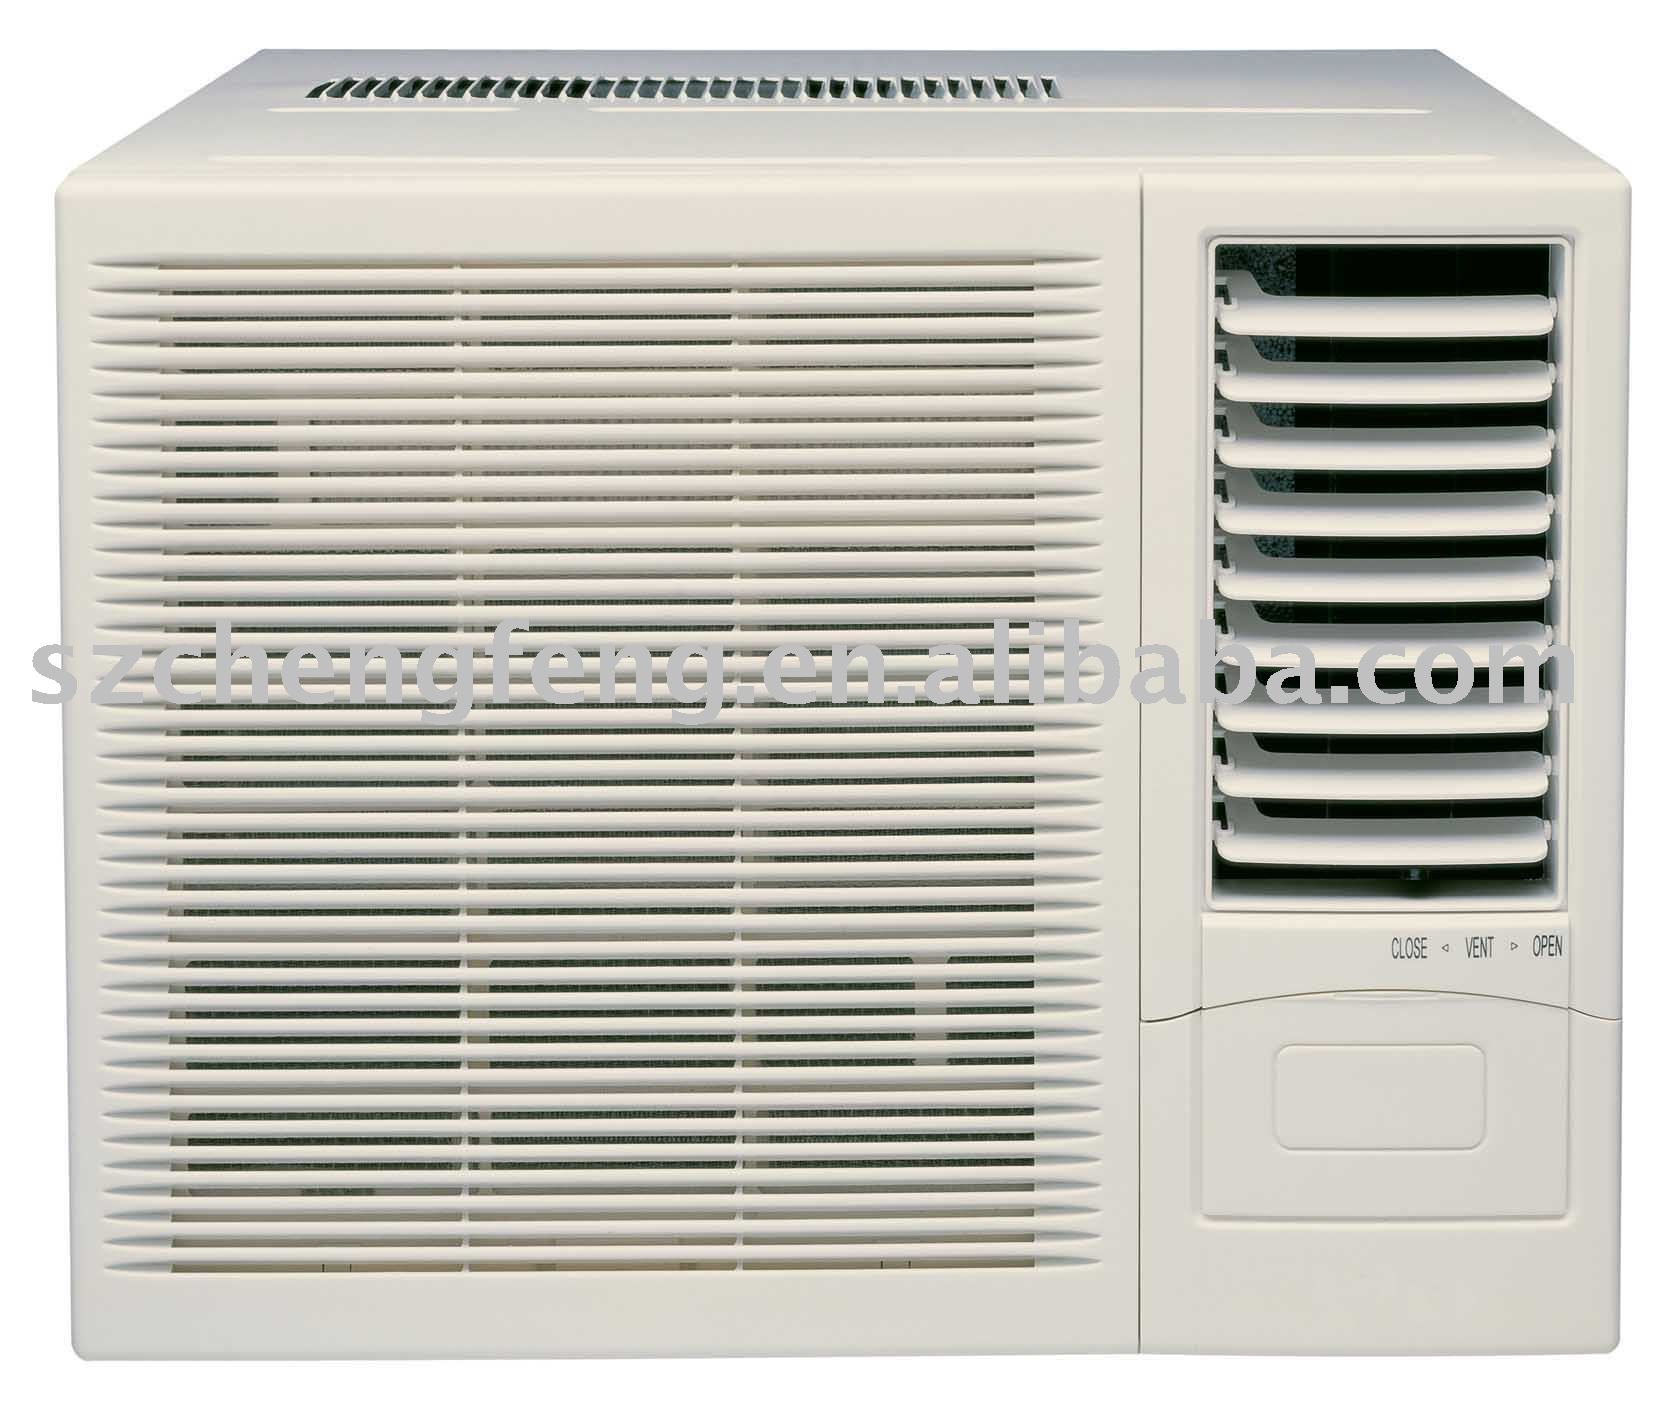 EBAY - PANASONIC AIR CONDITIONERS AT LOW PRICES